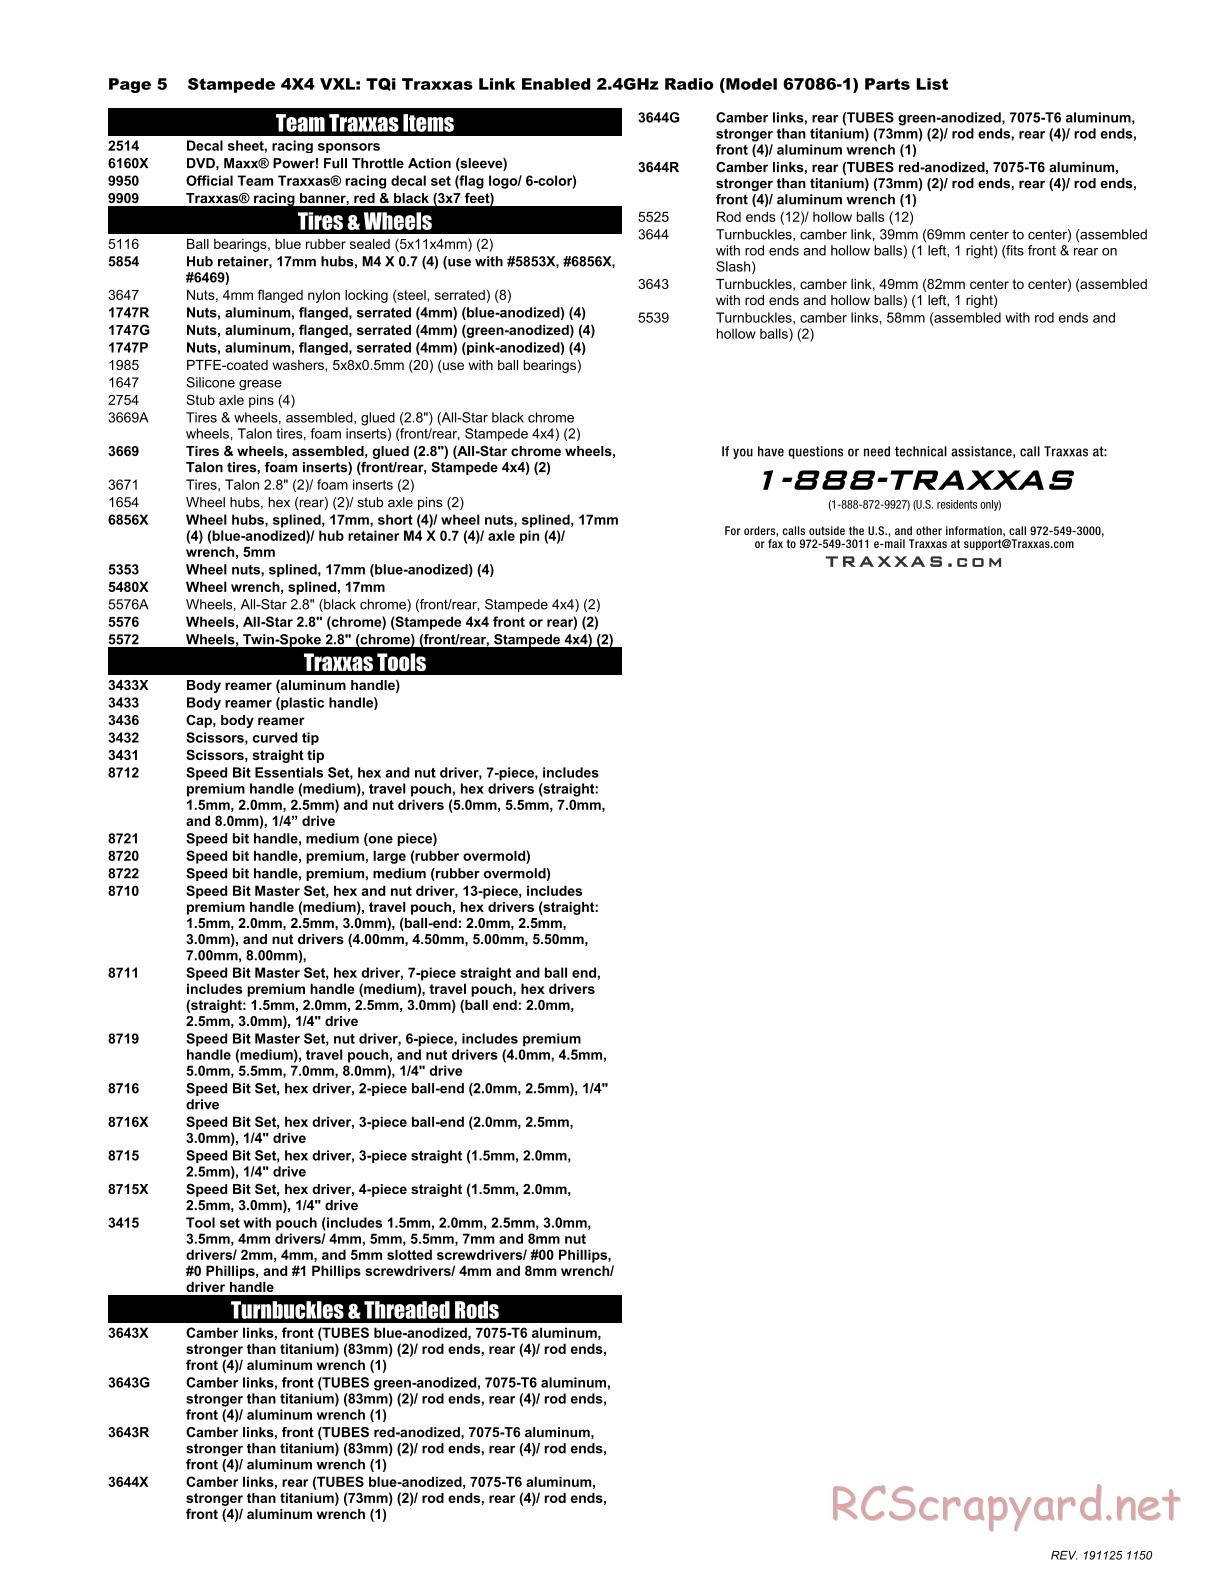 Traxxas - Stampede 4x4 VXL (2015) - Parts List - Page 5